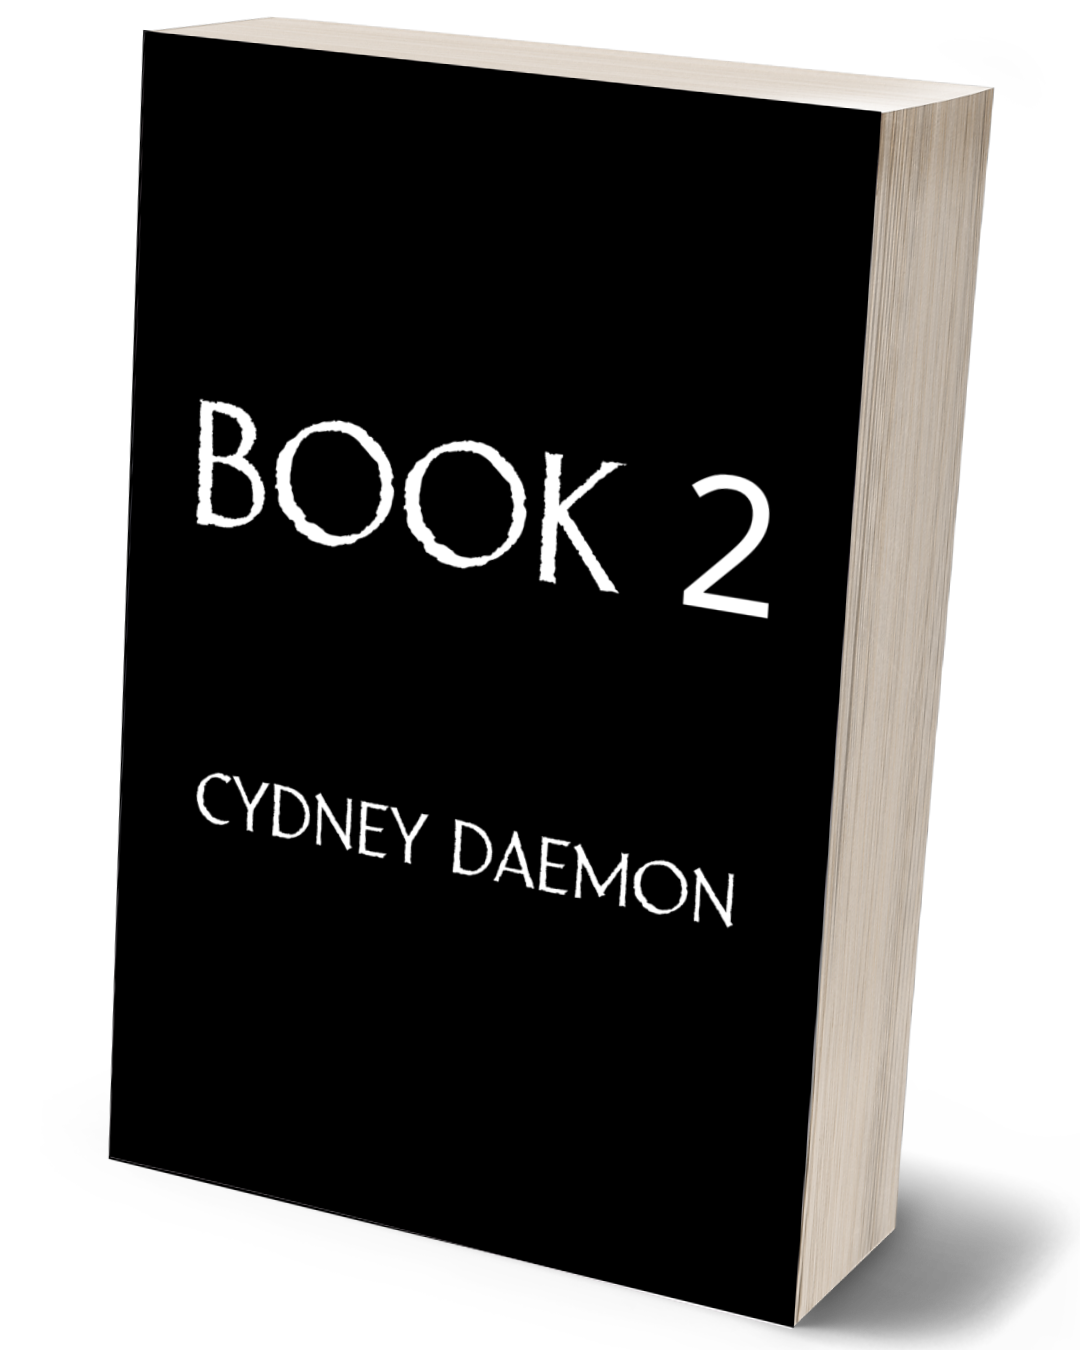 A placeholder for book 2 in the CHAOS series